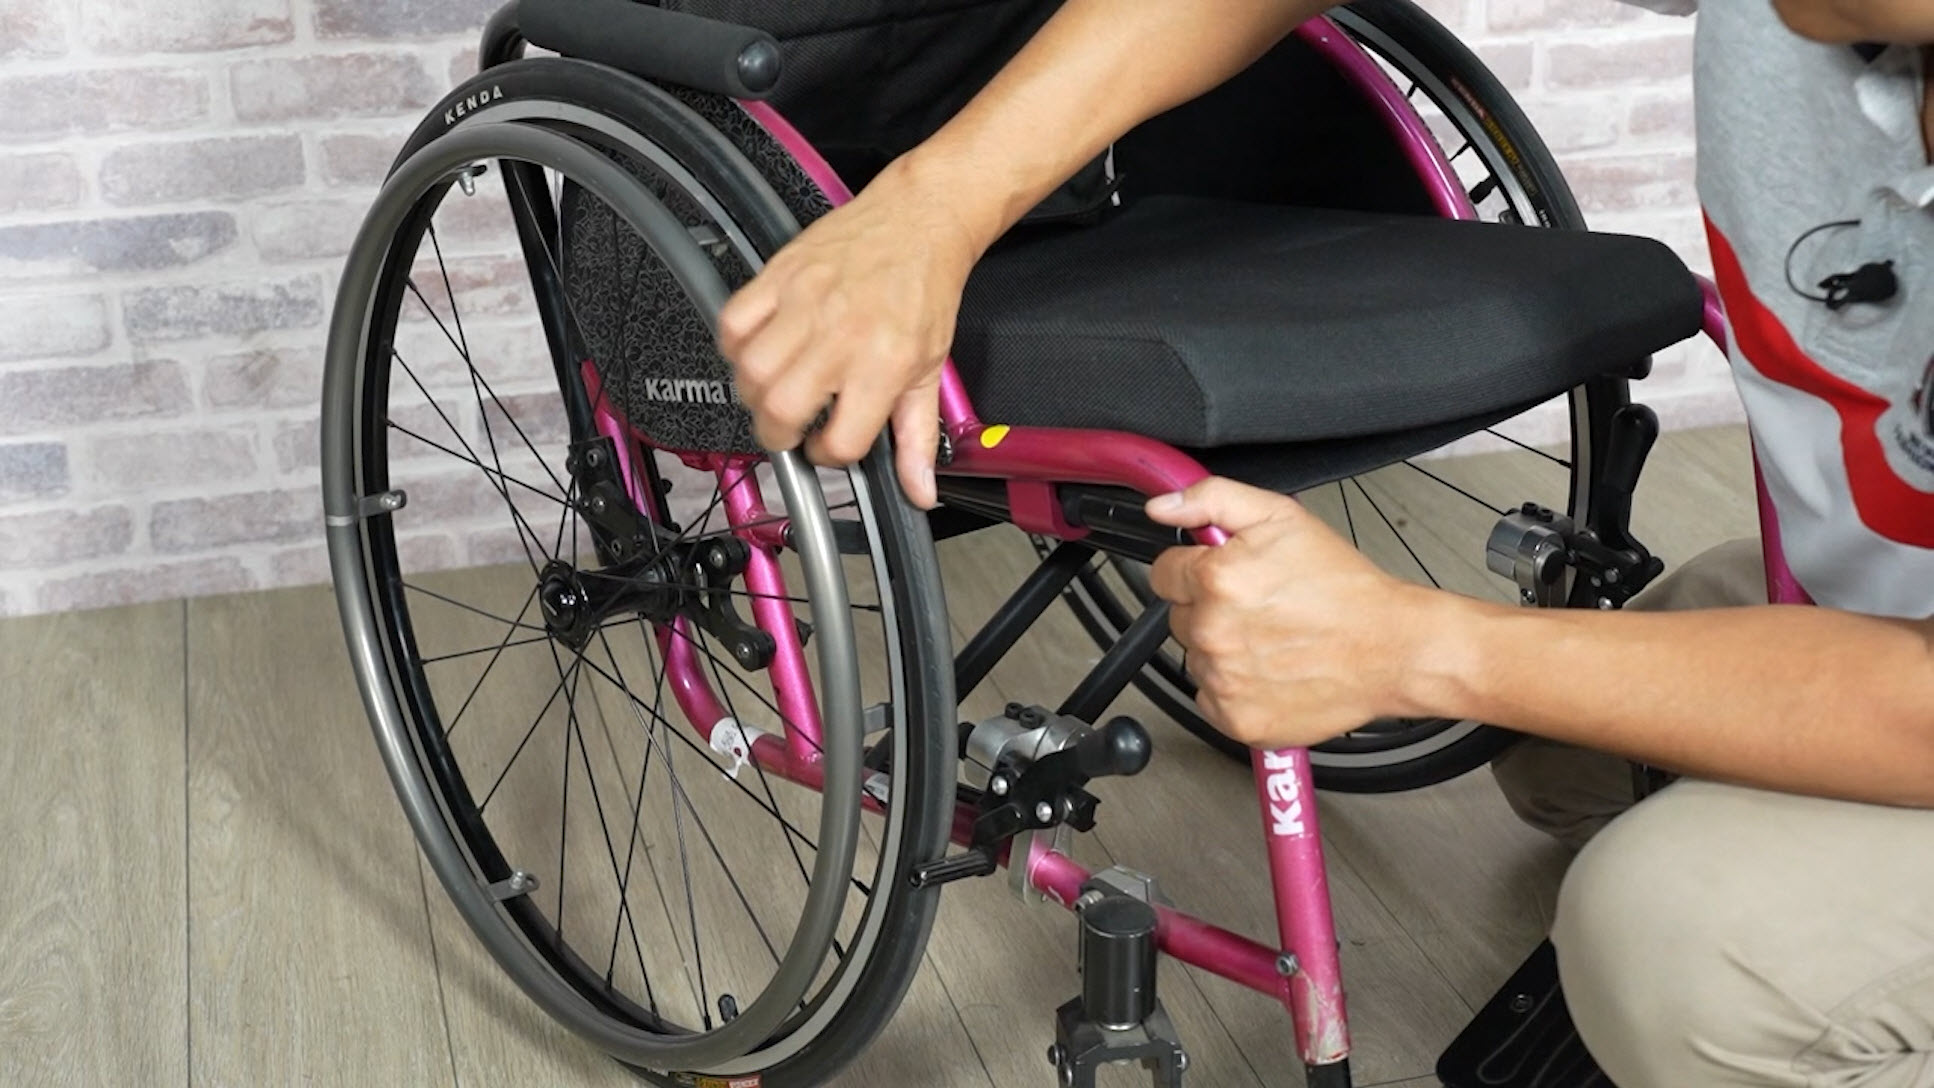 How to adjust the rear wheel camber angle of the active wheelchair?